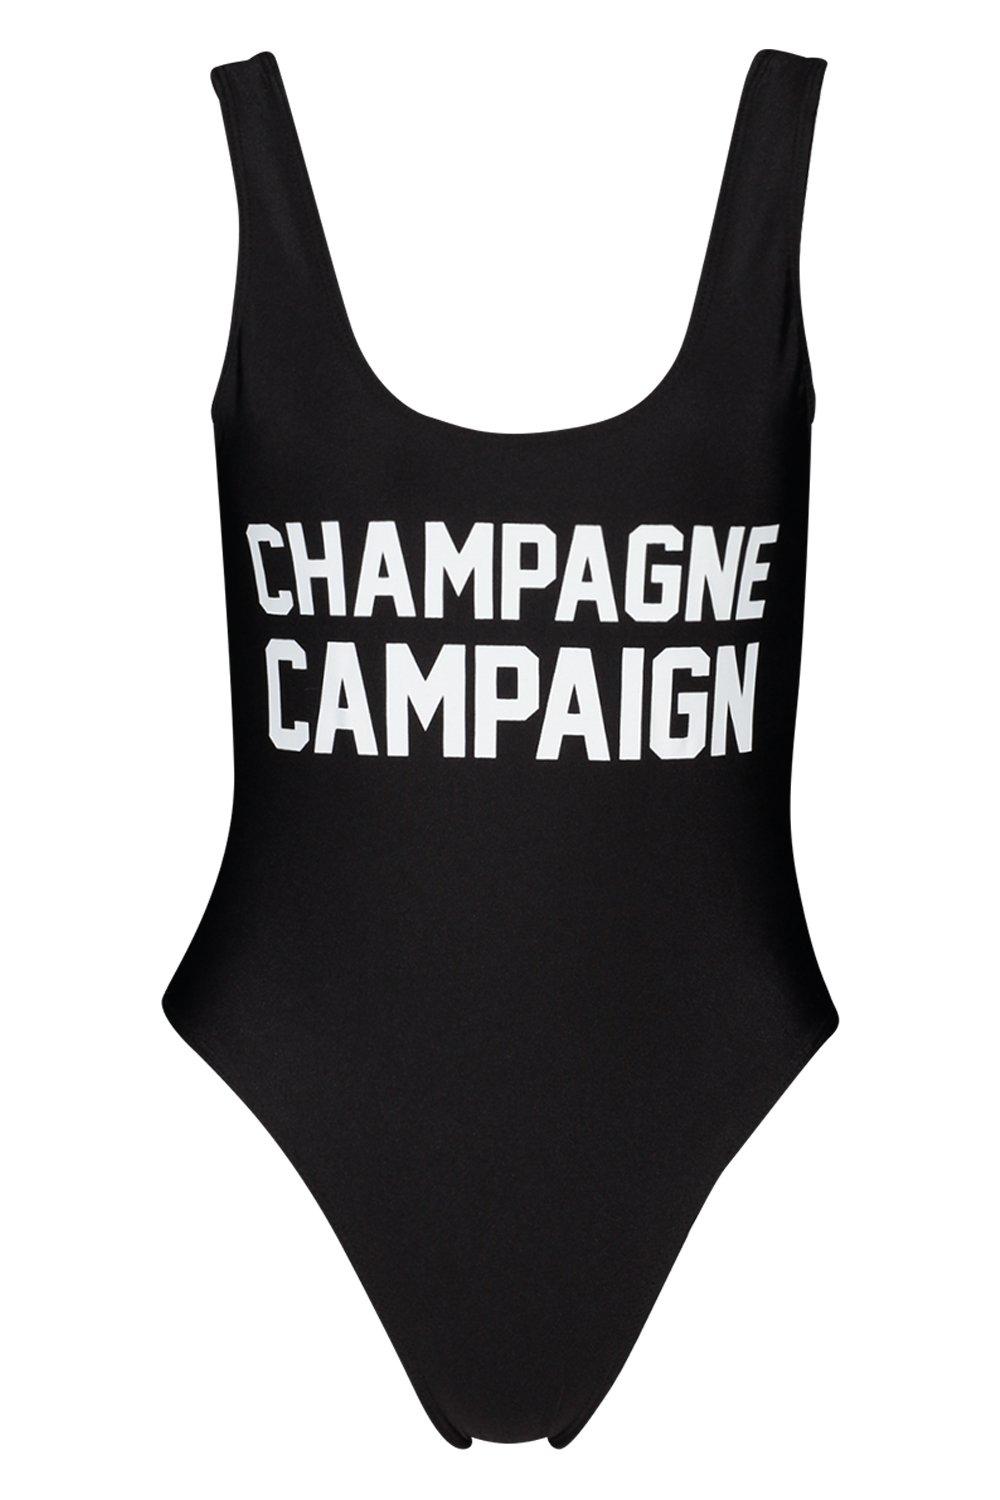 Champagne Campaign Swimsuit 